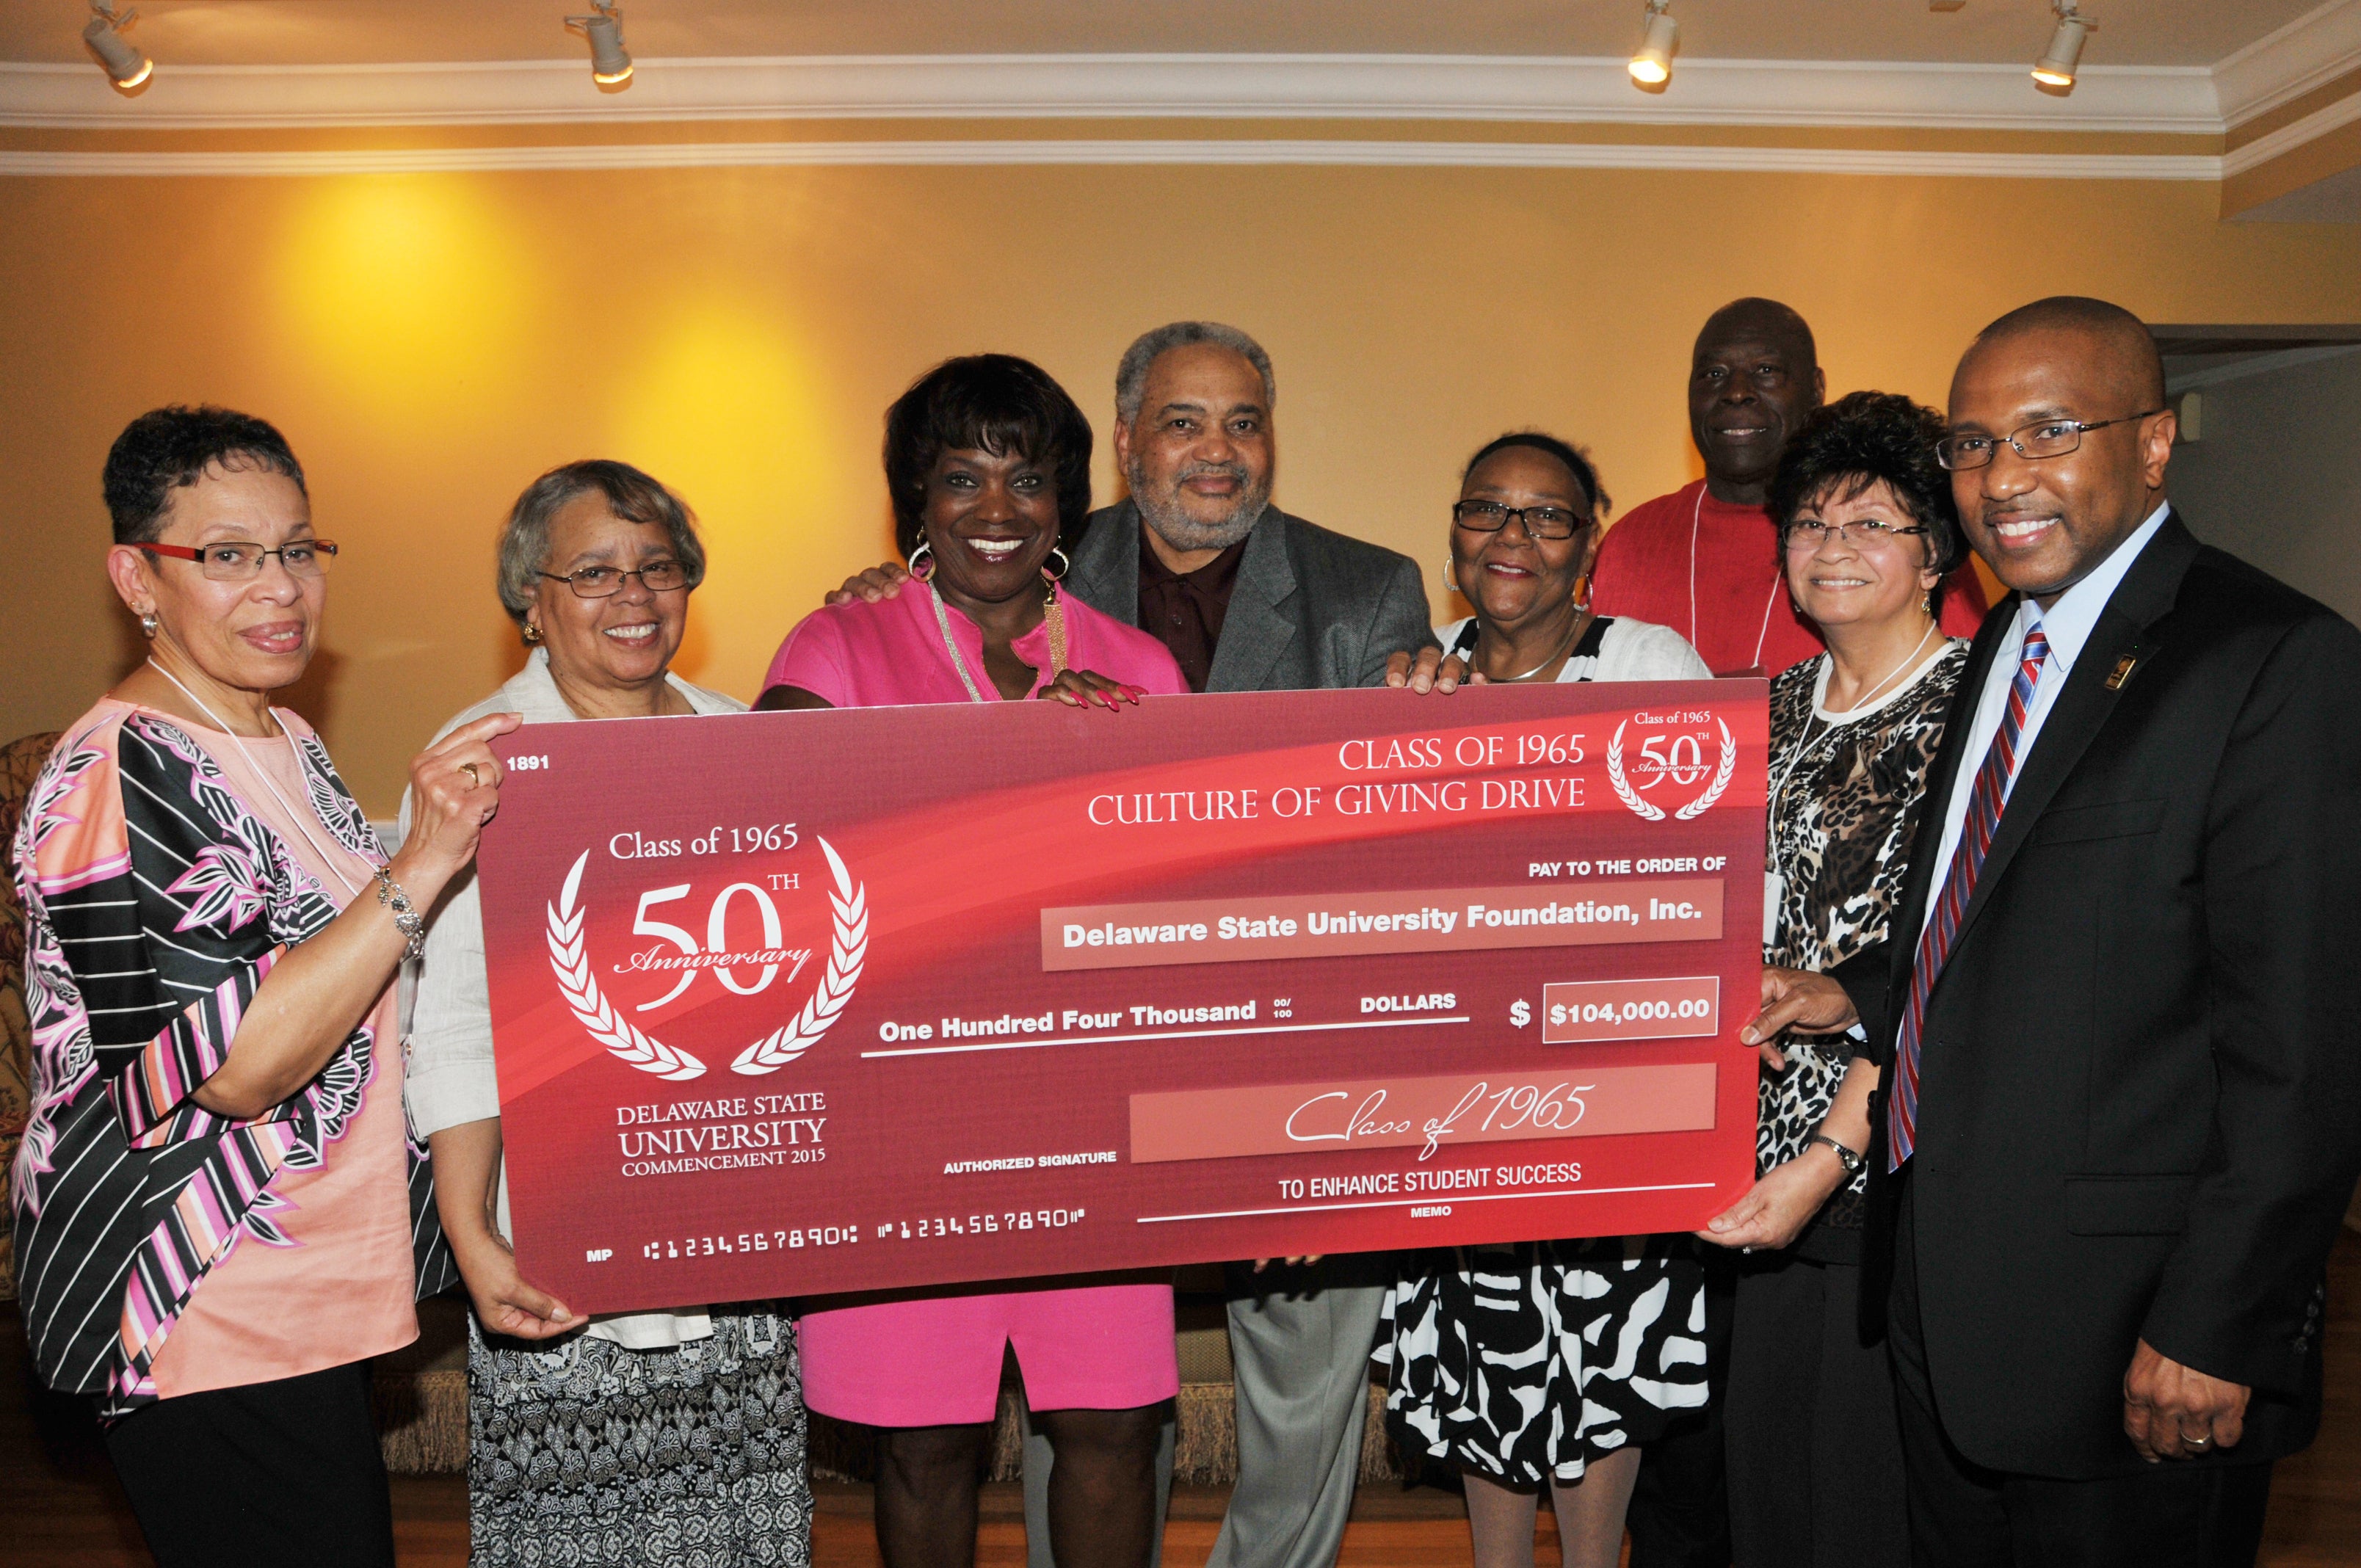  Members of the class of 1965 present their record gift at a May 18 reception. (Photo courtesy of Delaware State University) 